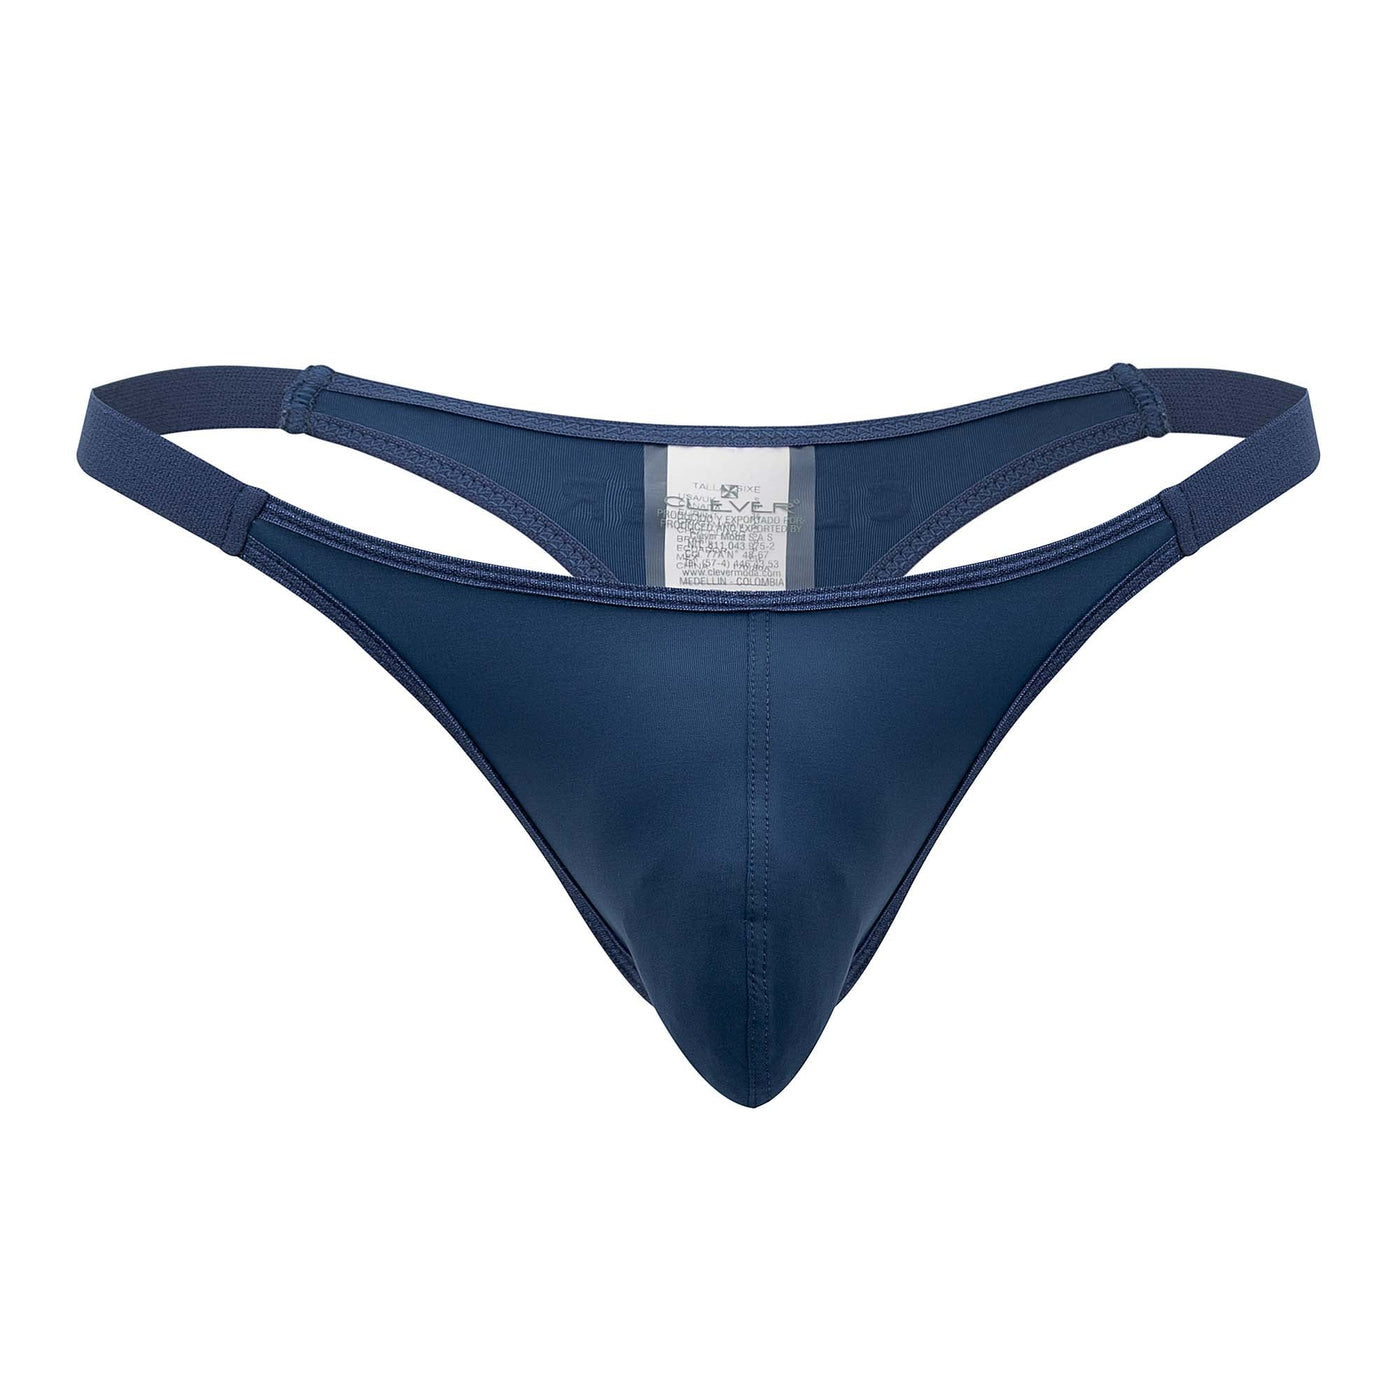 Clever 0905 Luxor Thong Blue